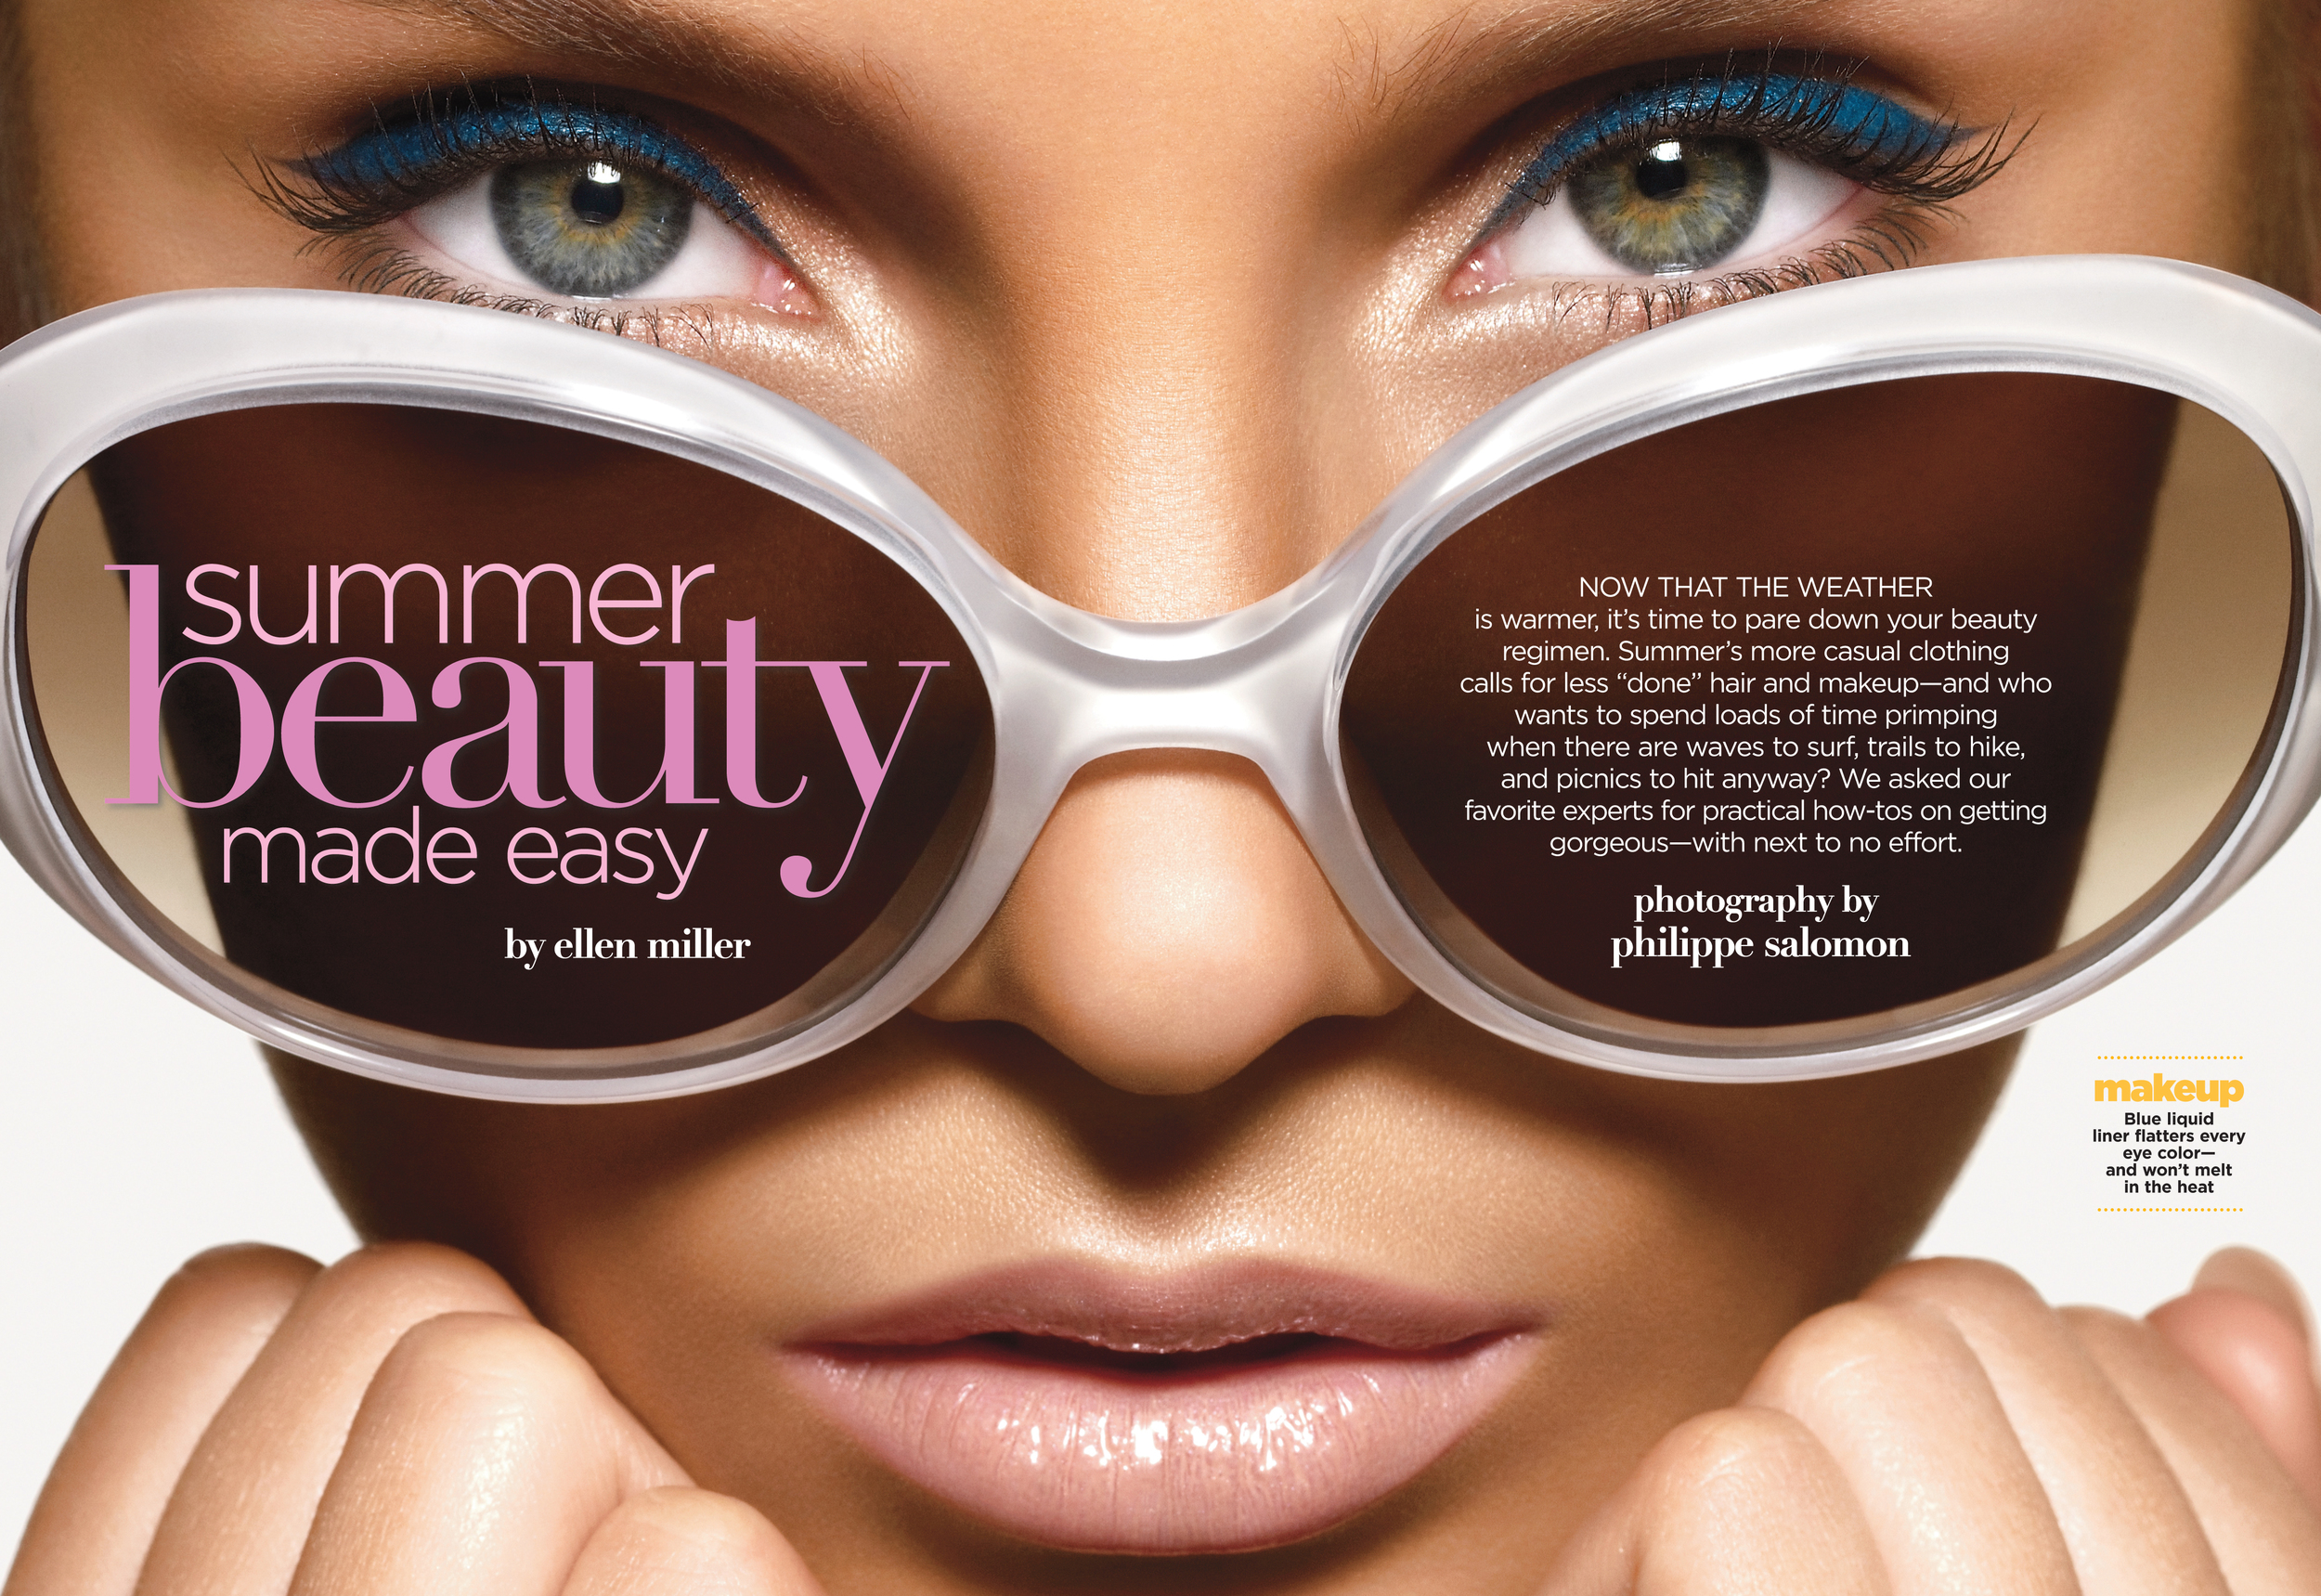 Summer Beauty Made Easy, July 2010